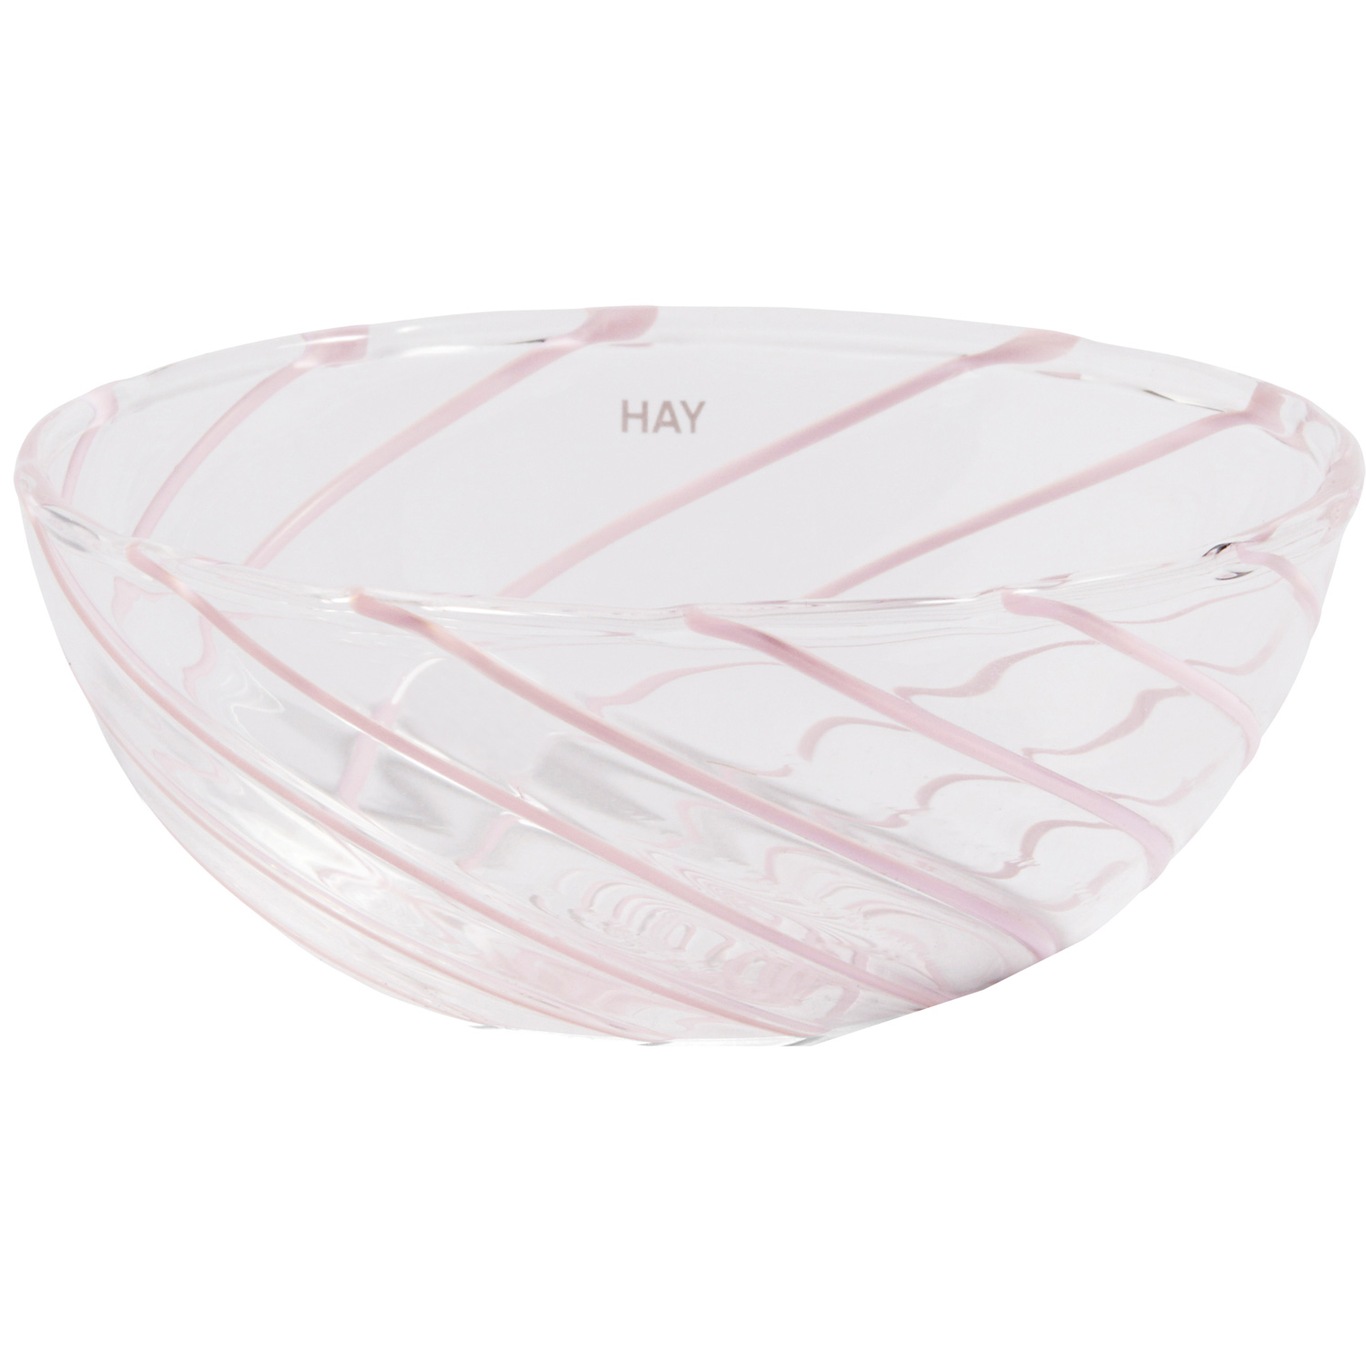 Spin Bowl 2-pack, Clear / Pink Stripe